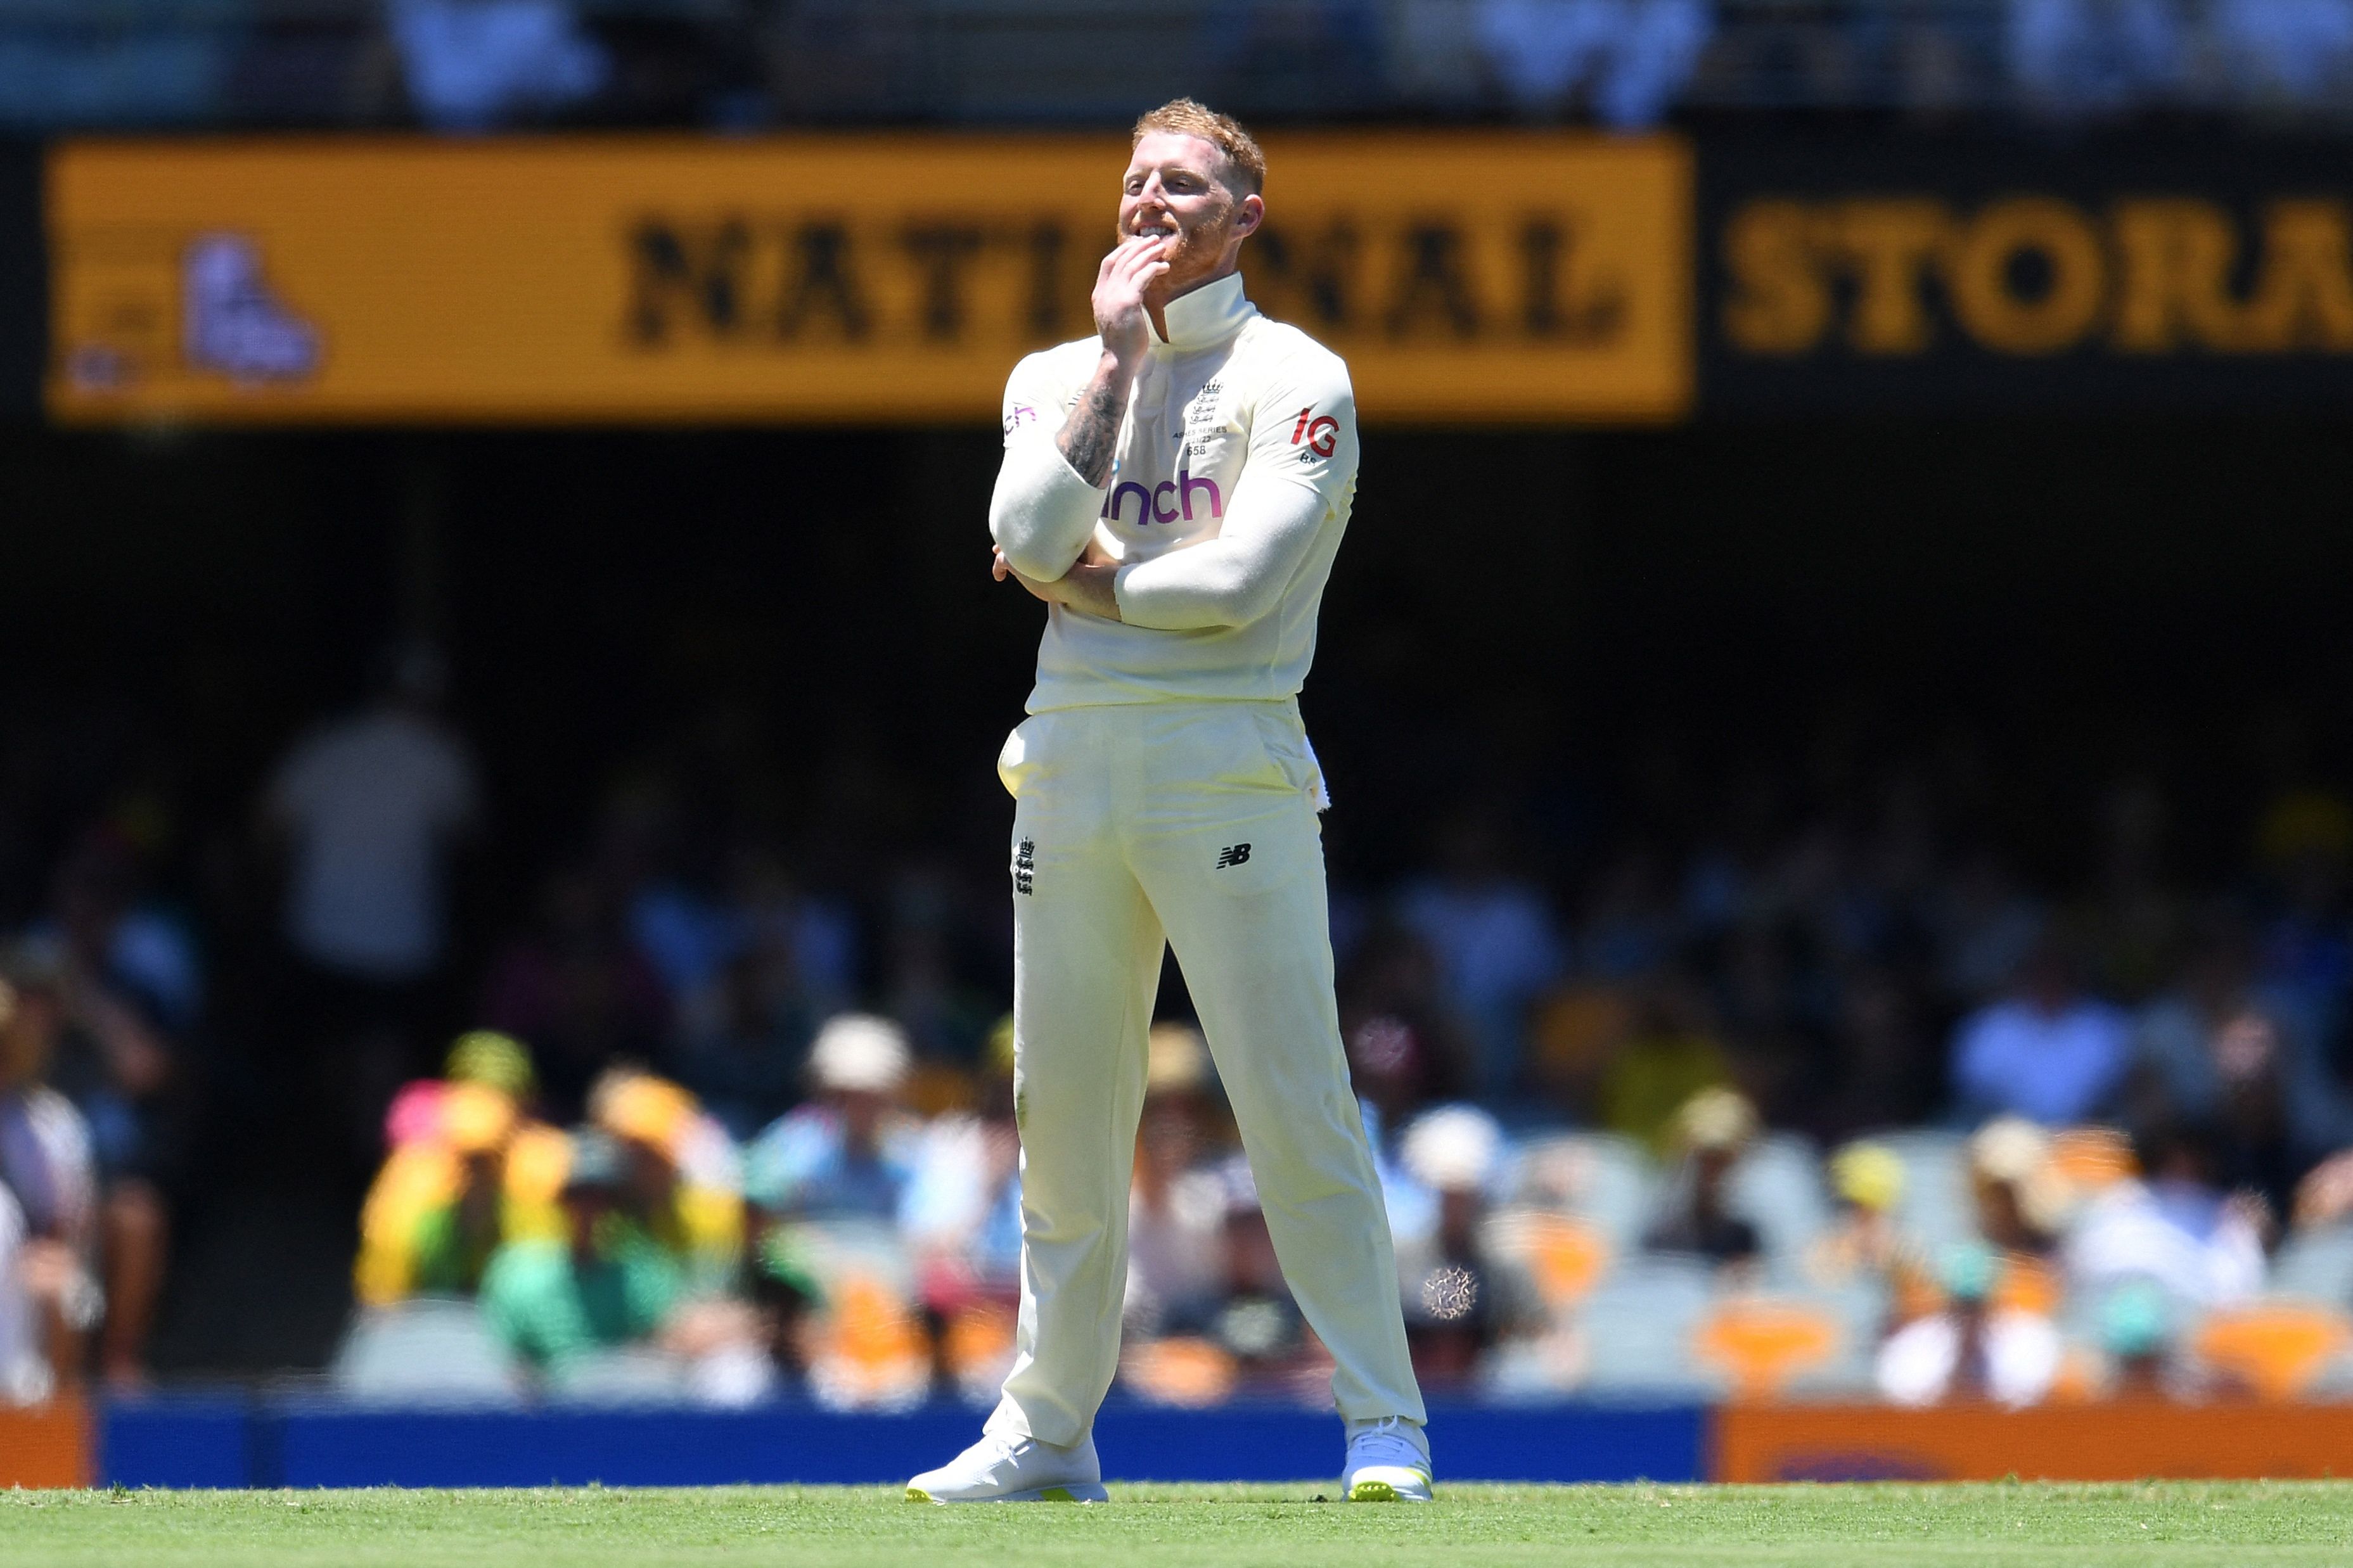 Ashes 2021-22 | Ben Stokes hopeful of playing final Ashes Test despite his injury concern, says James Anderson